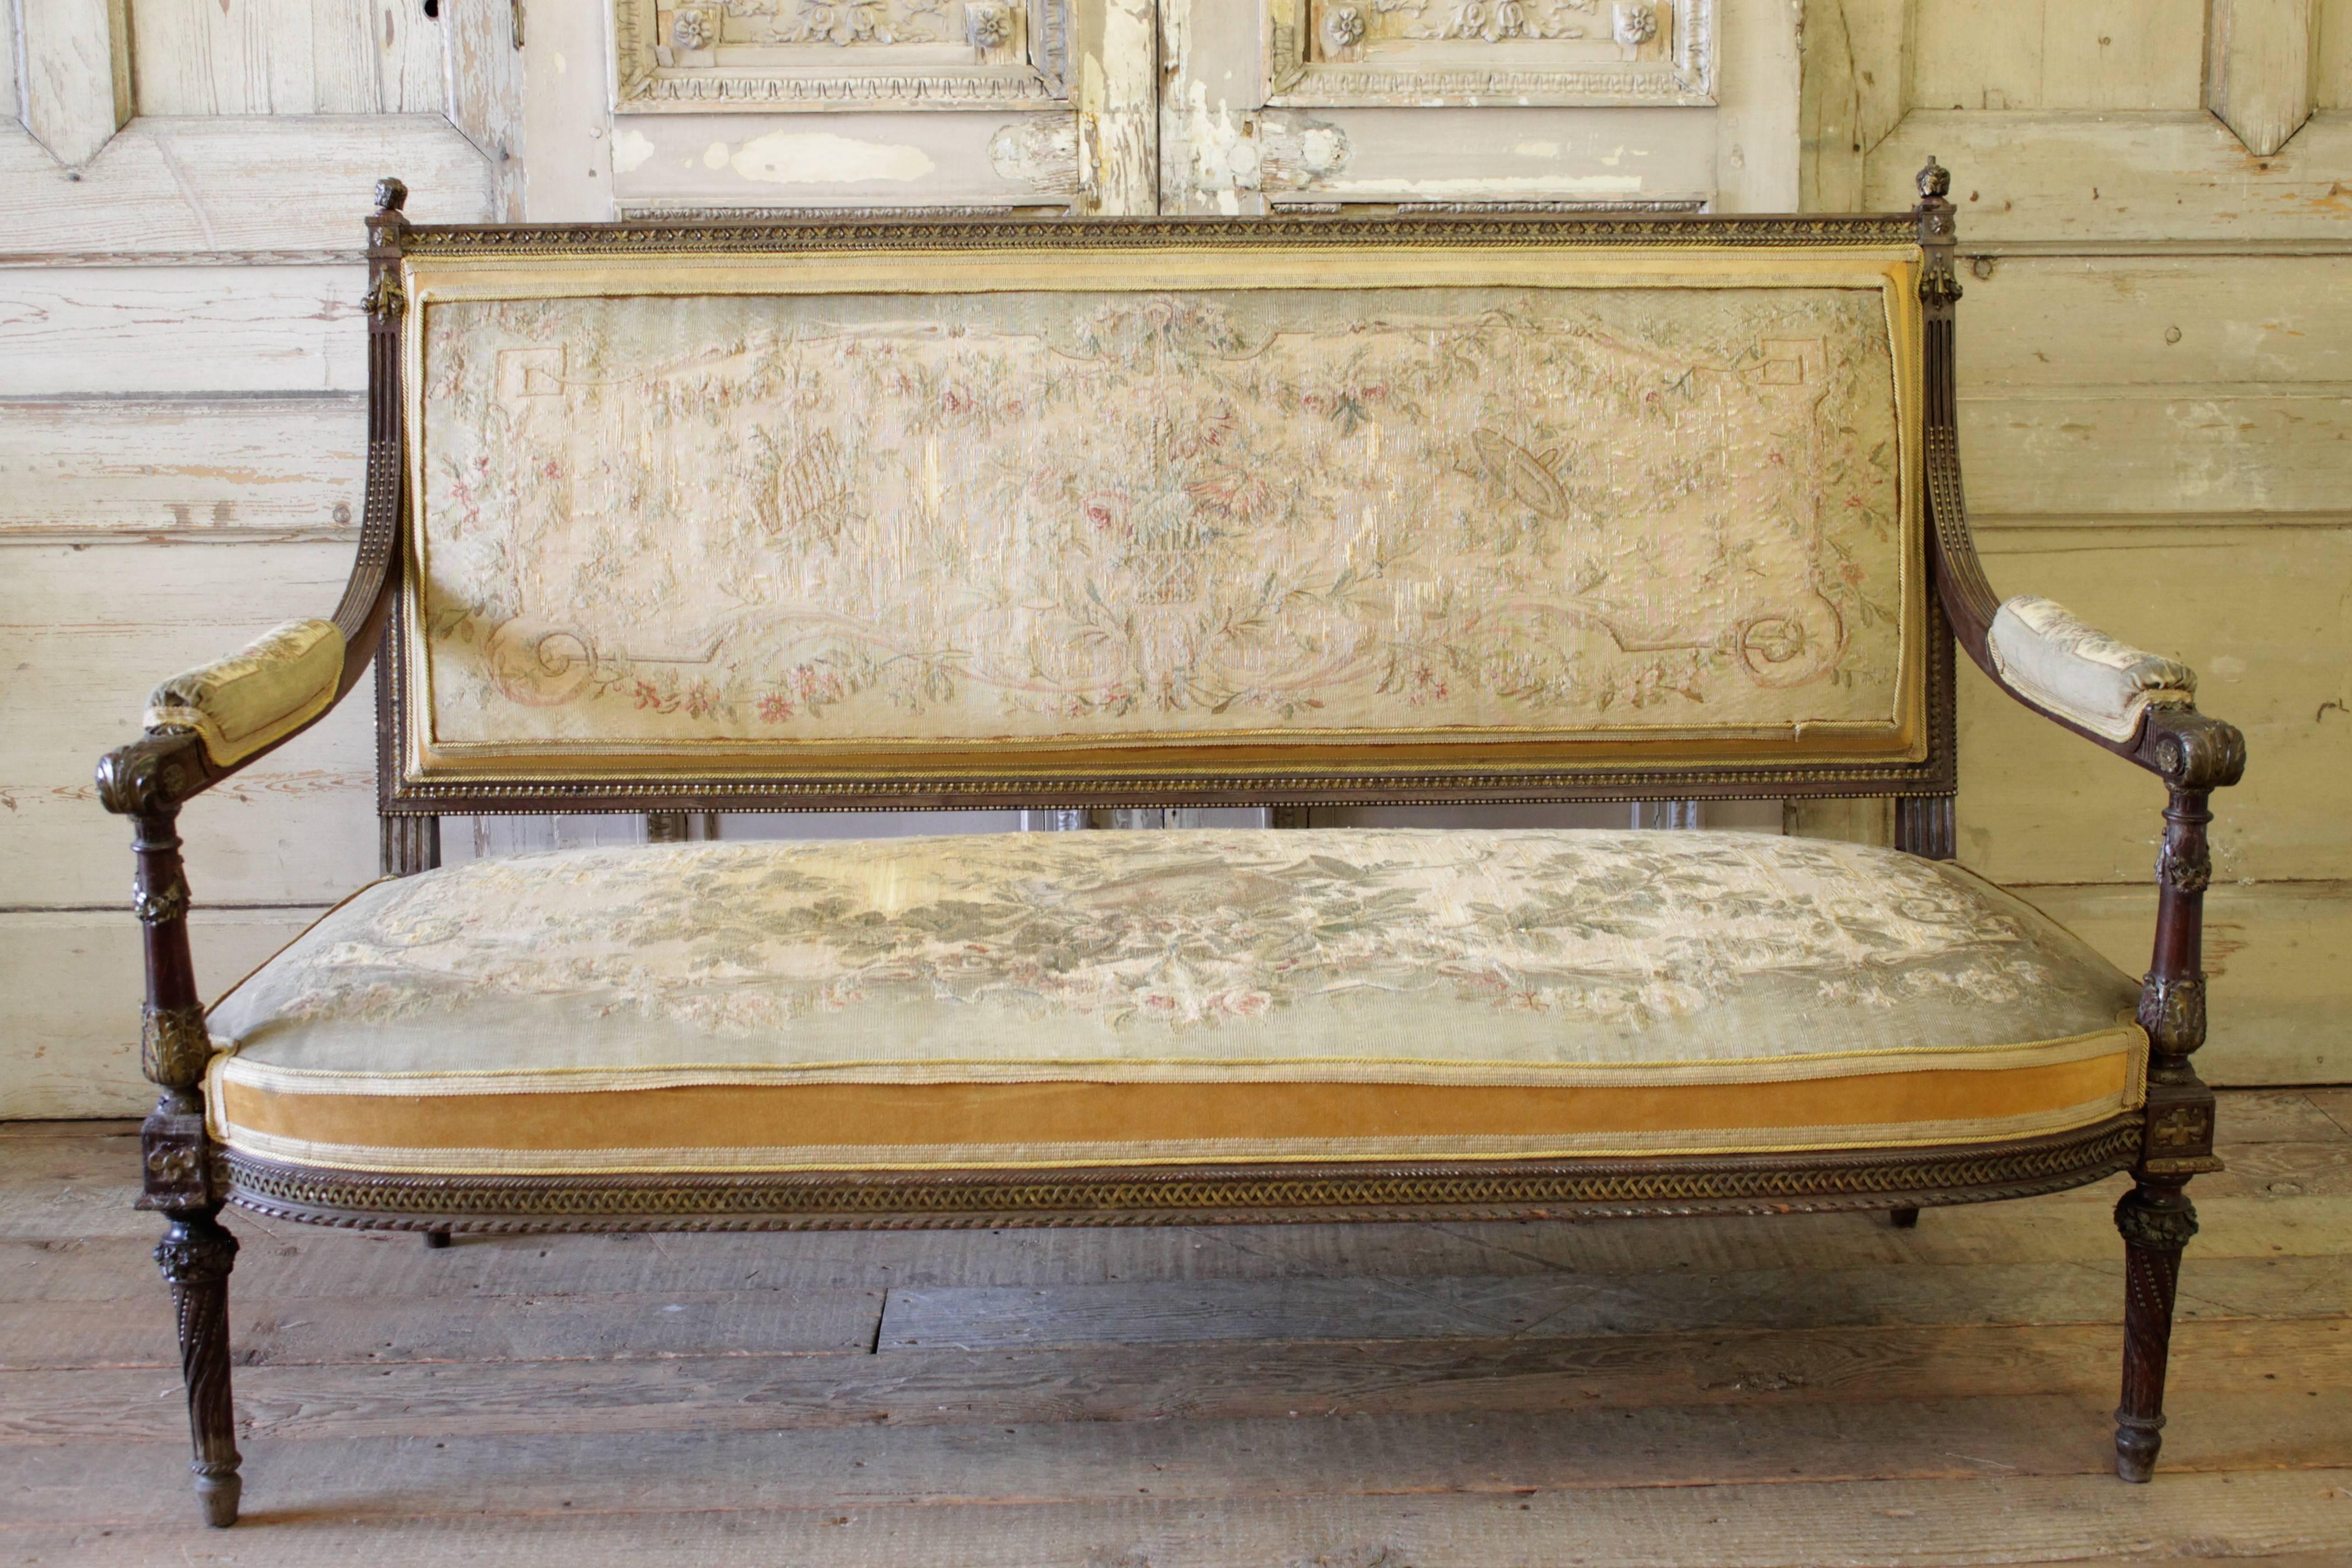 This beautiful Louis XVI style salon set has the original finish in wood and gilt carvings. Small carved rose swags adorn the backs and arms of each piece, with detailed carvings throughout the frame.
The original tapestry and velvet upholstery are